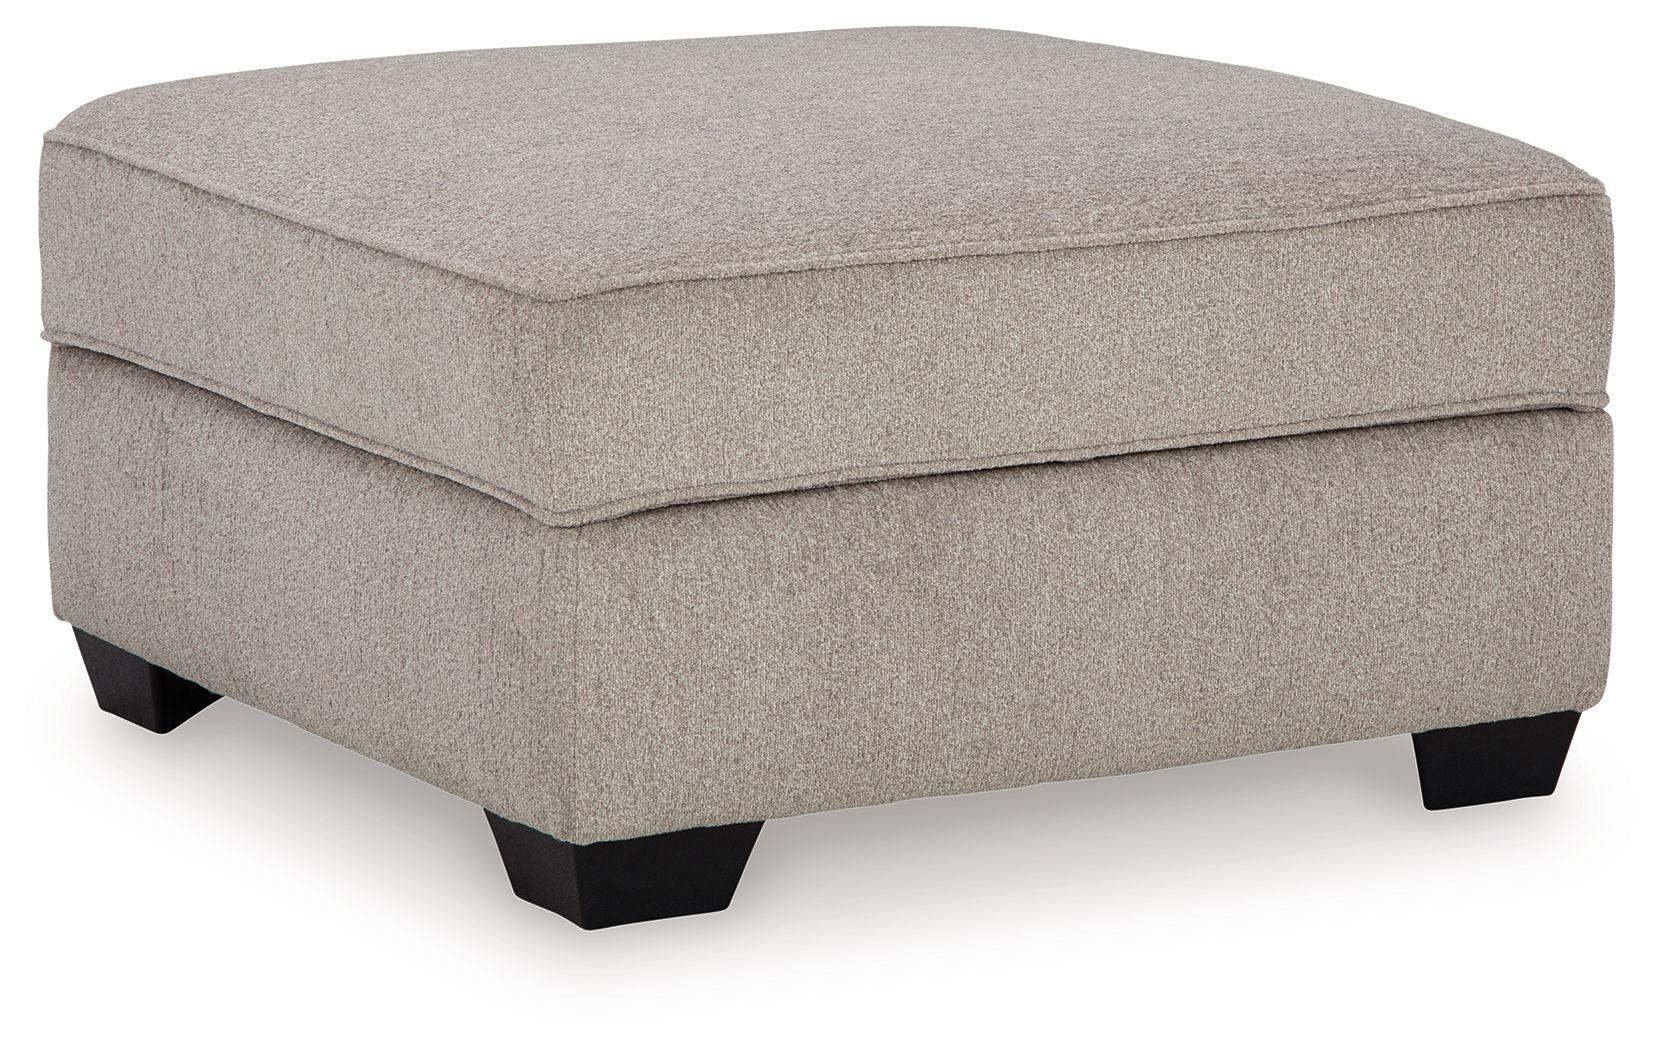 Signature Design by Ashley® - Claireah - Umber - Ottoman With Storage - 5th Avenue Furniture